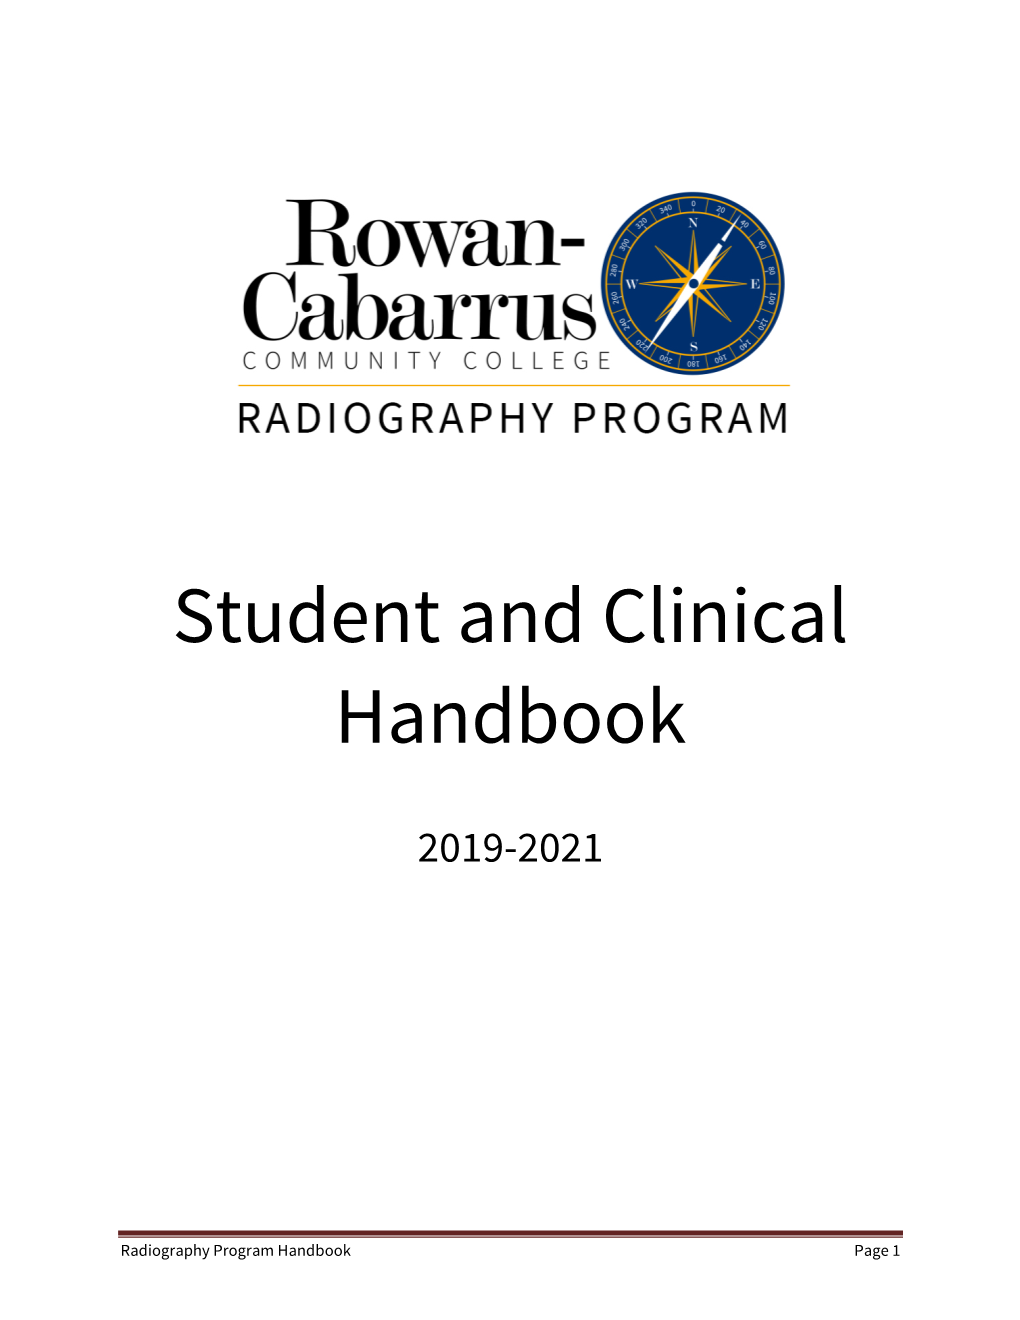 Student and Clinical Handbook